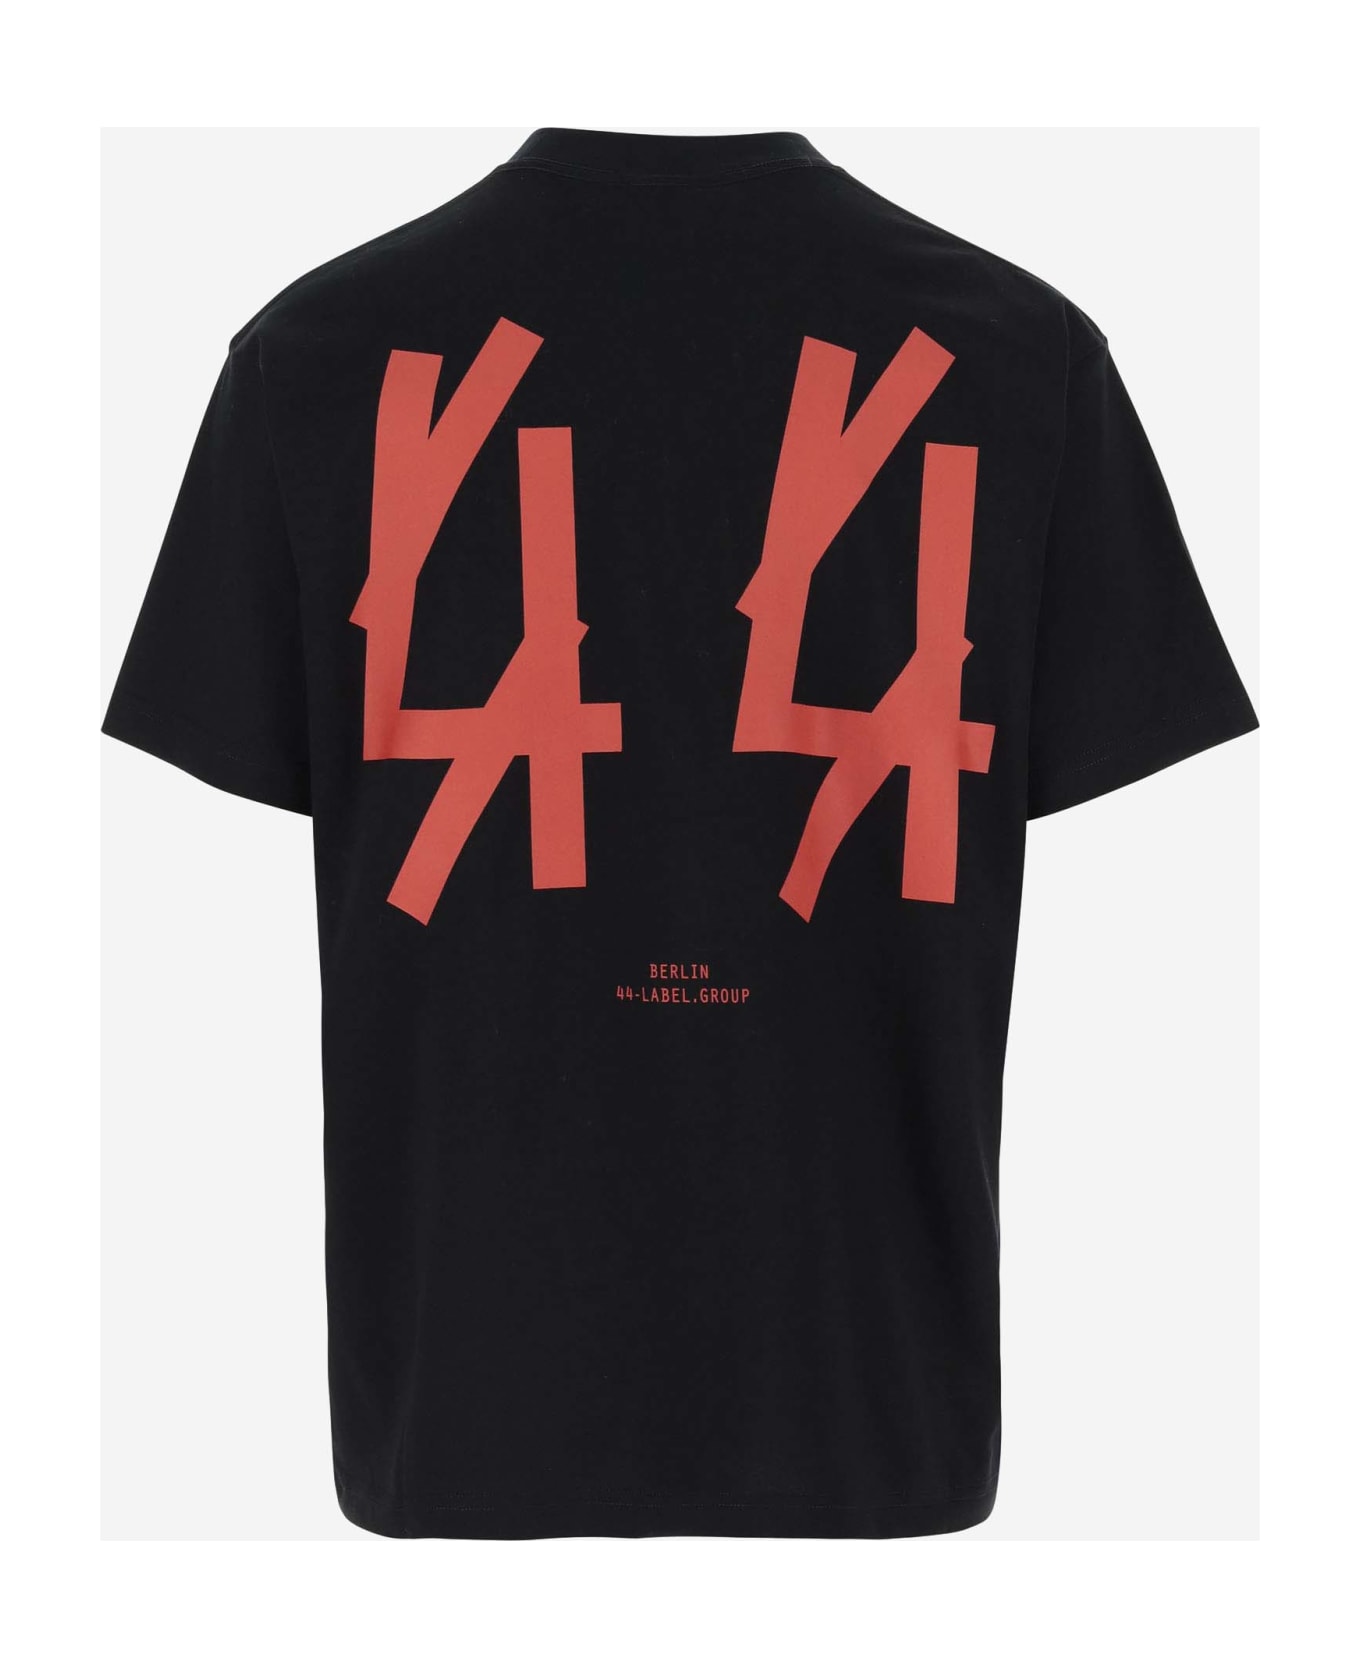 44 Label Group Cotton T-shirt With Logo - Nero